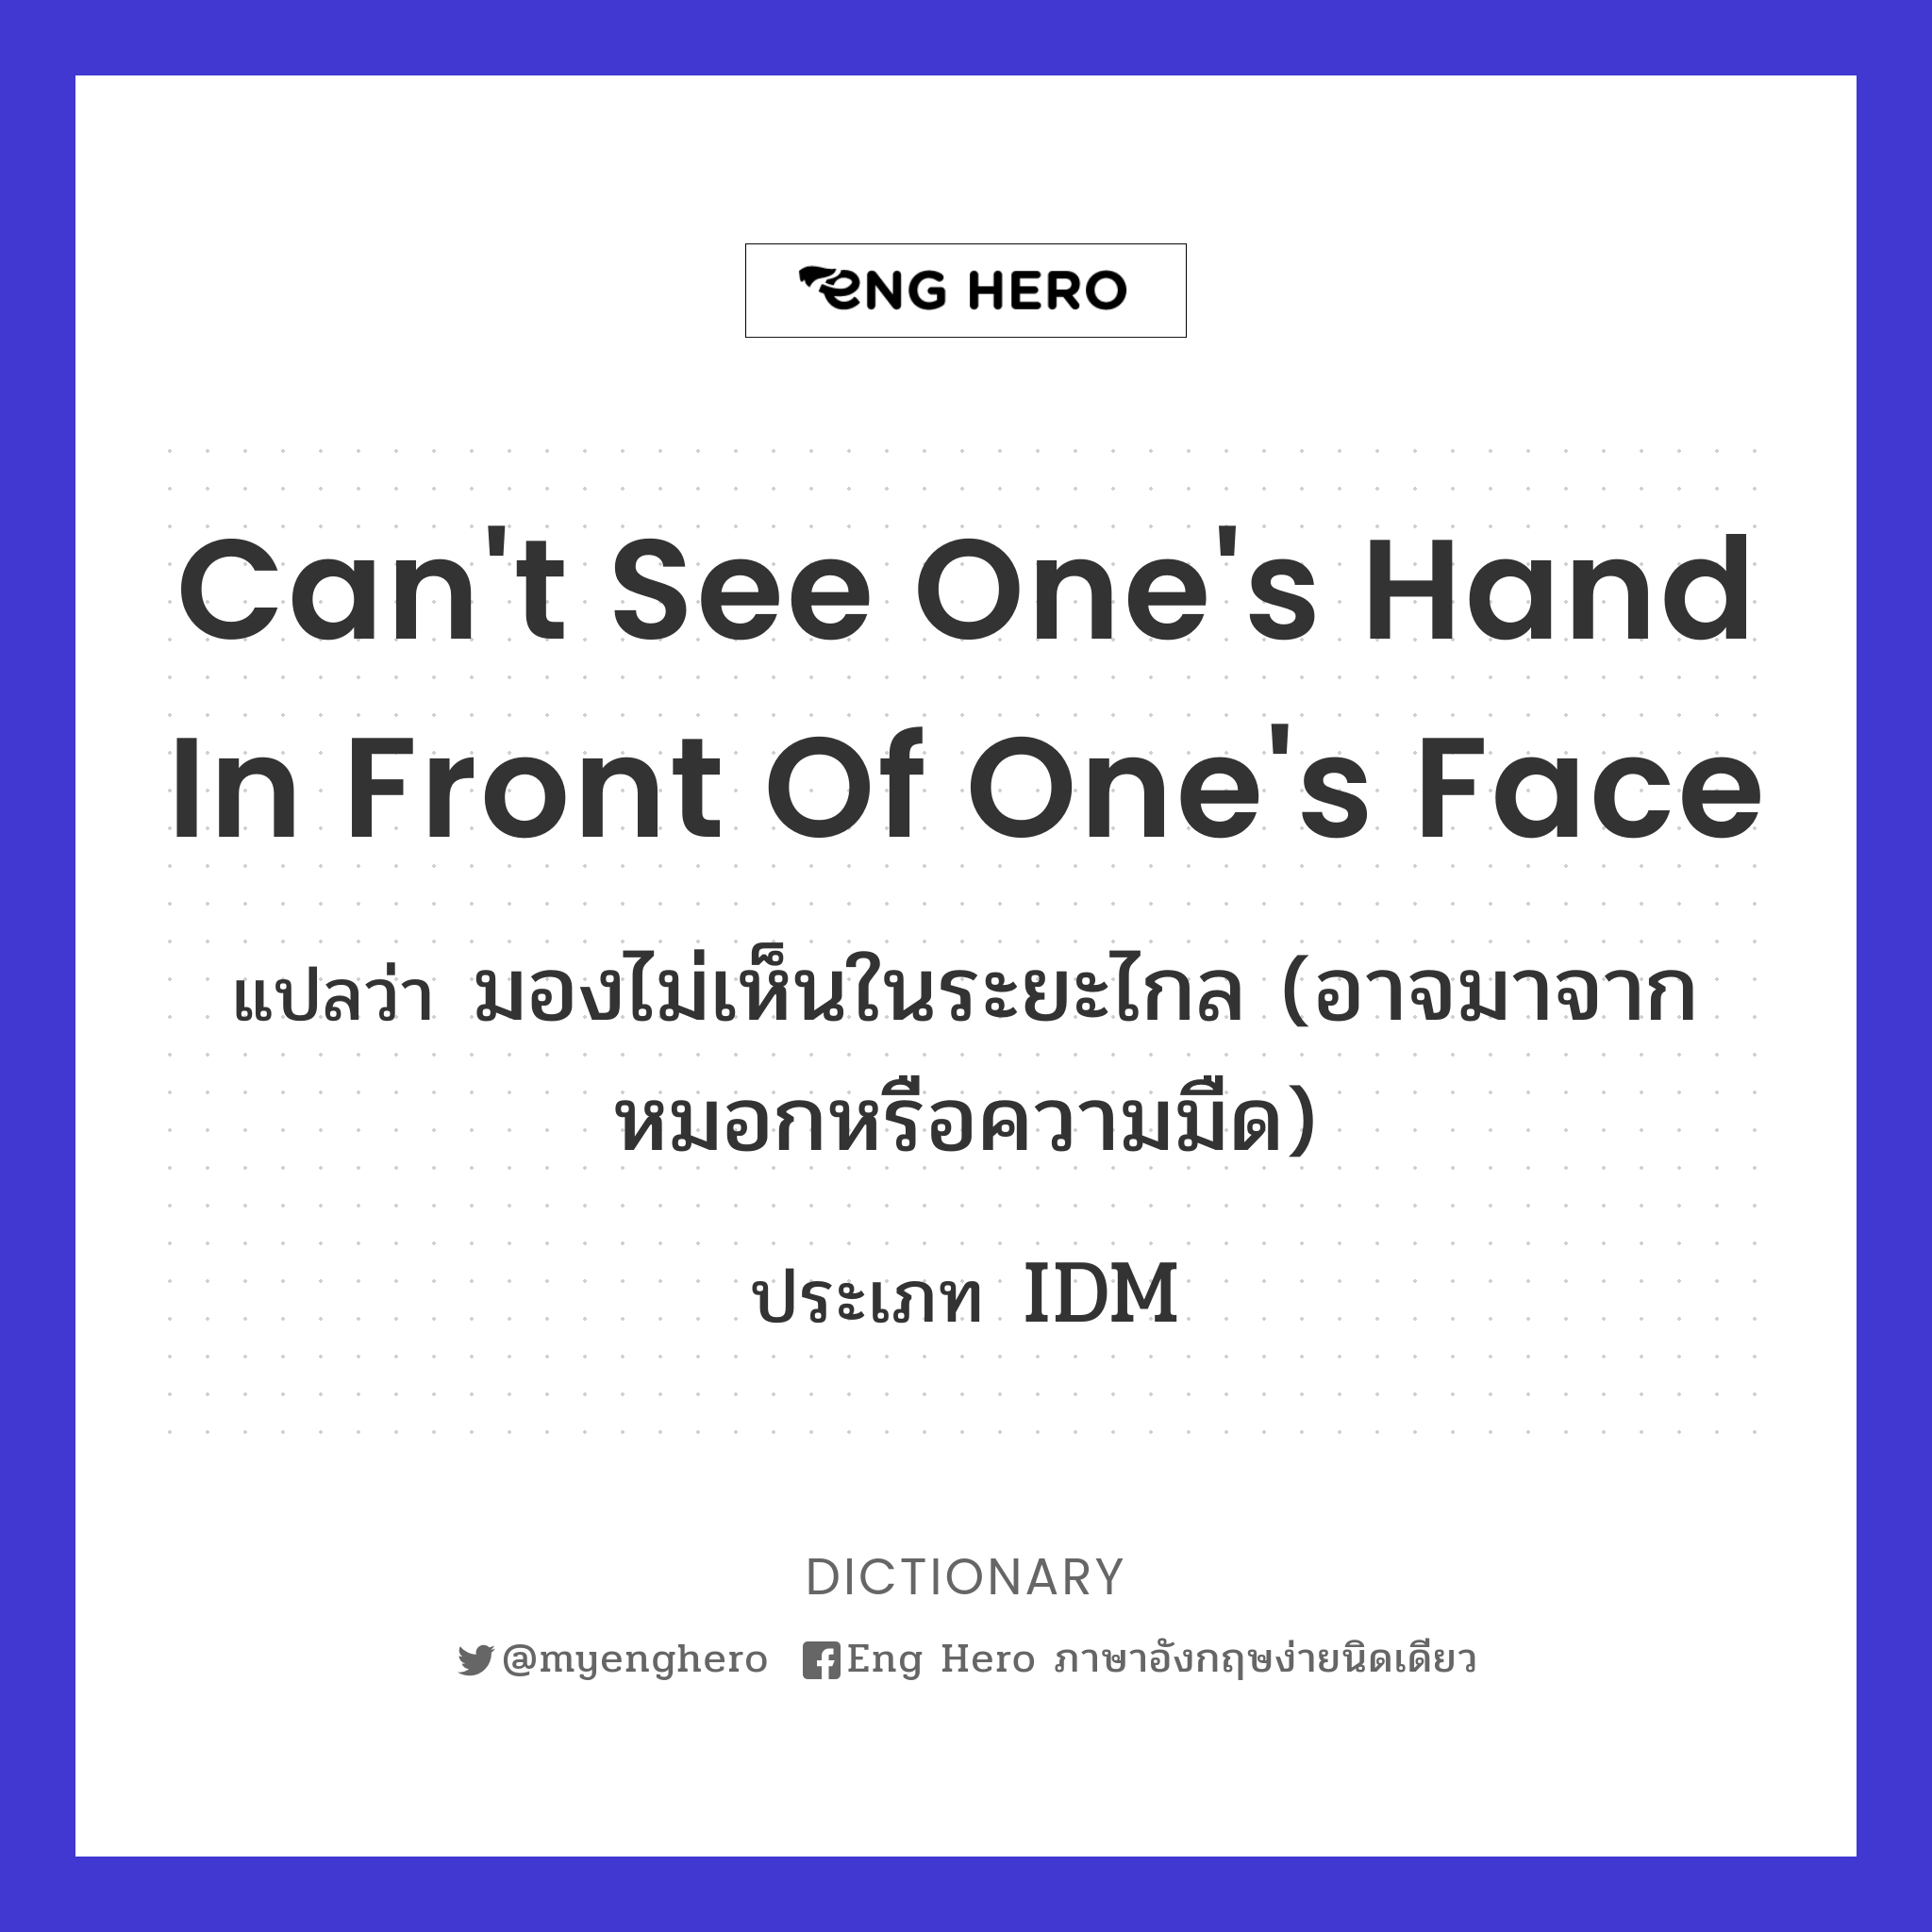 can't see one's hand in front of one's face